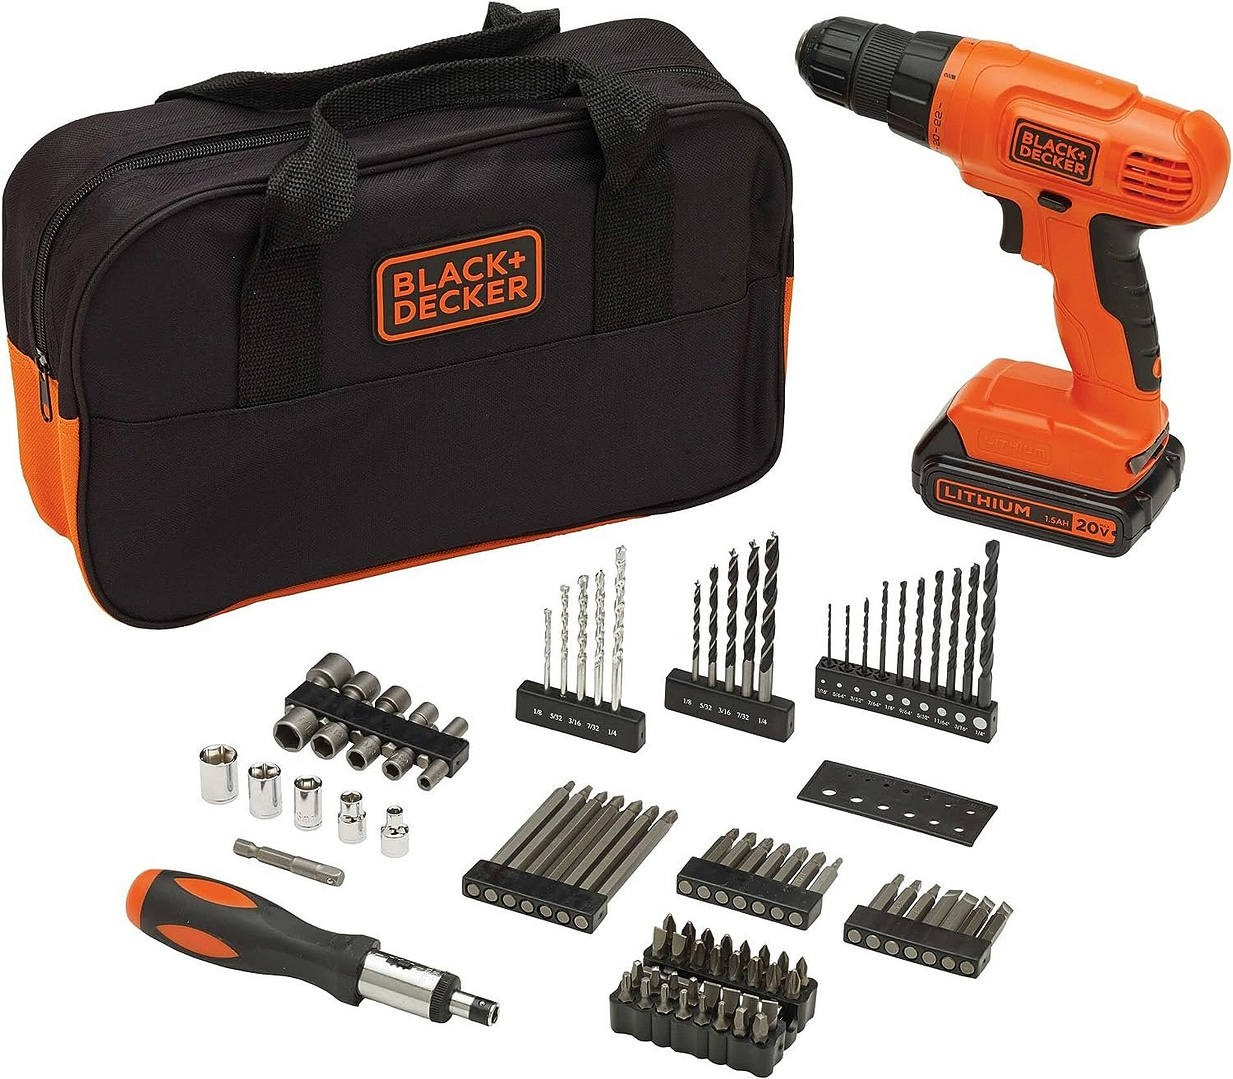 blackdecker 20v max powerconnect cordless drill kit review